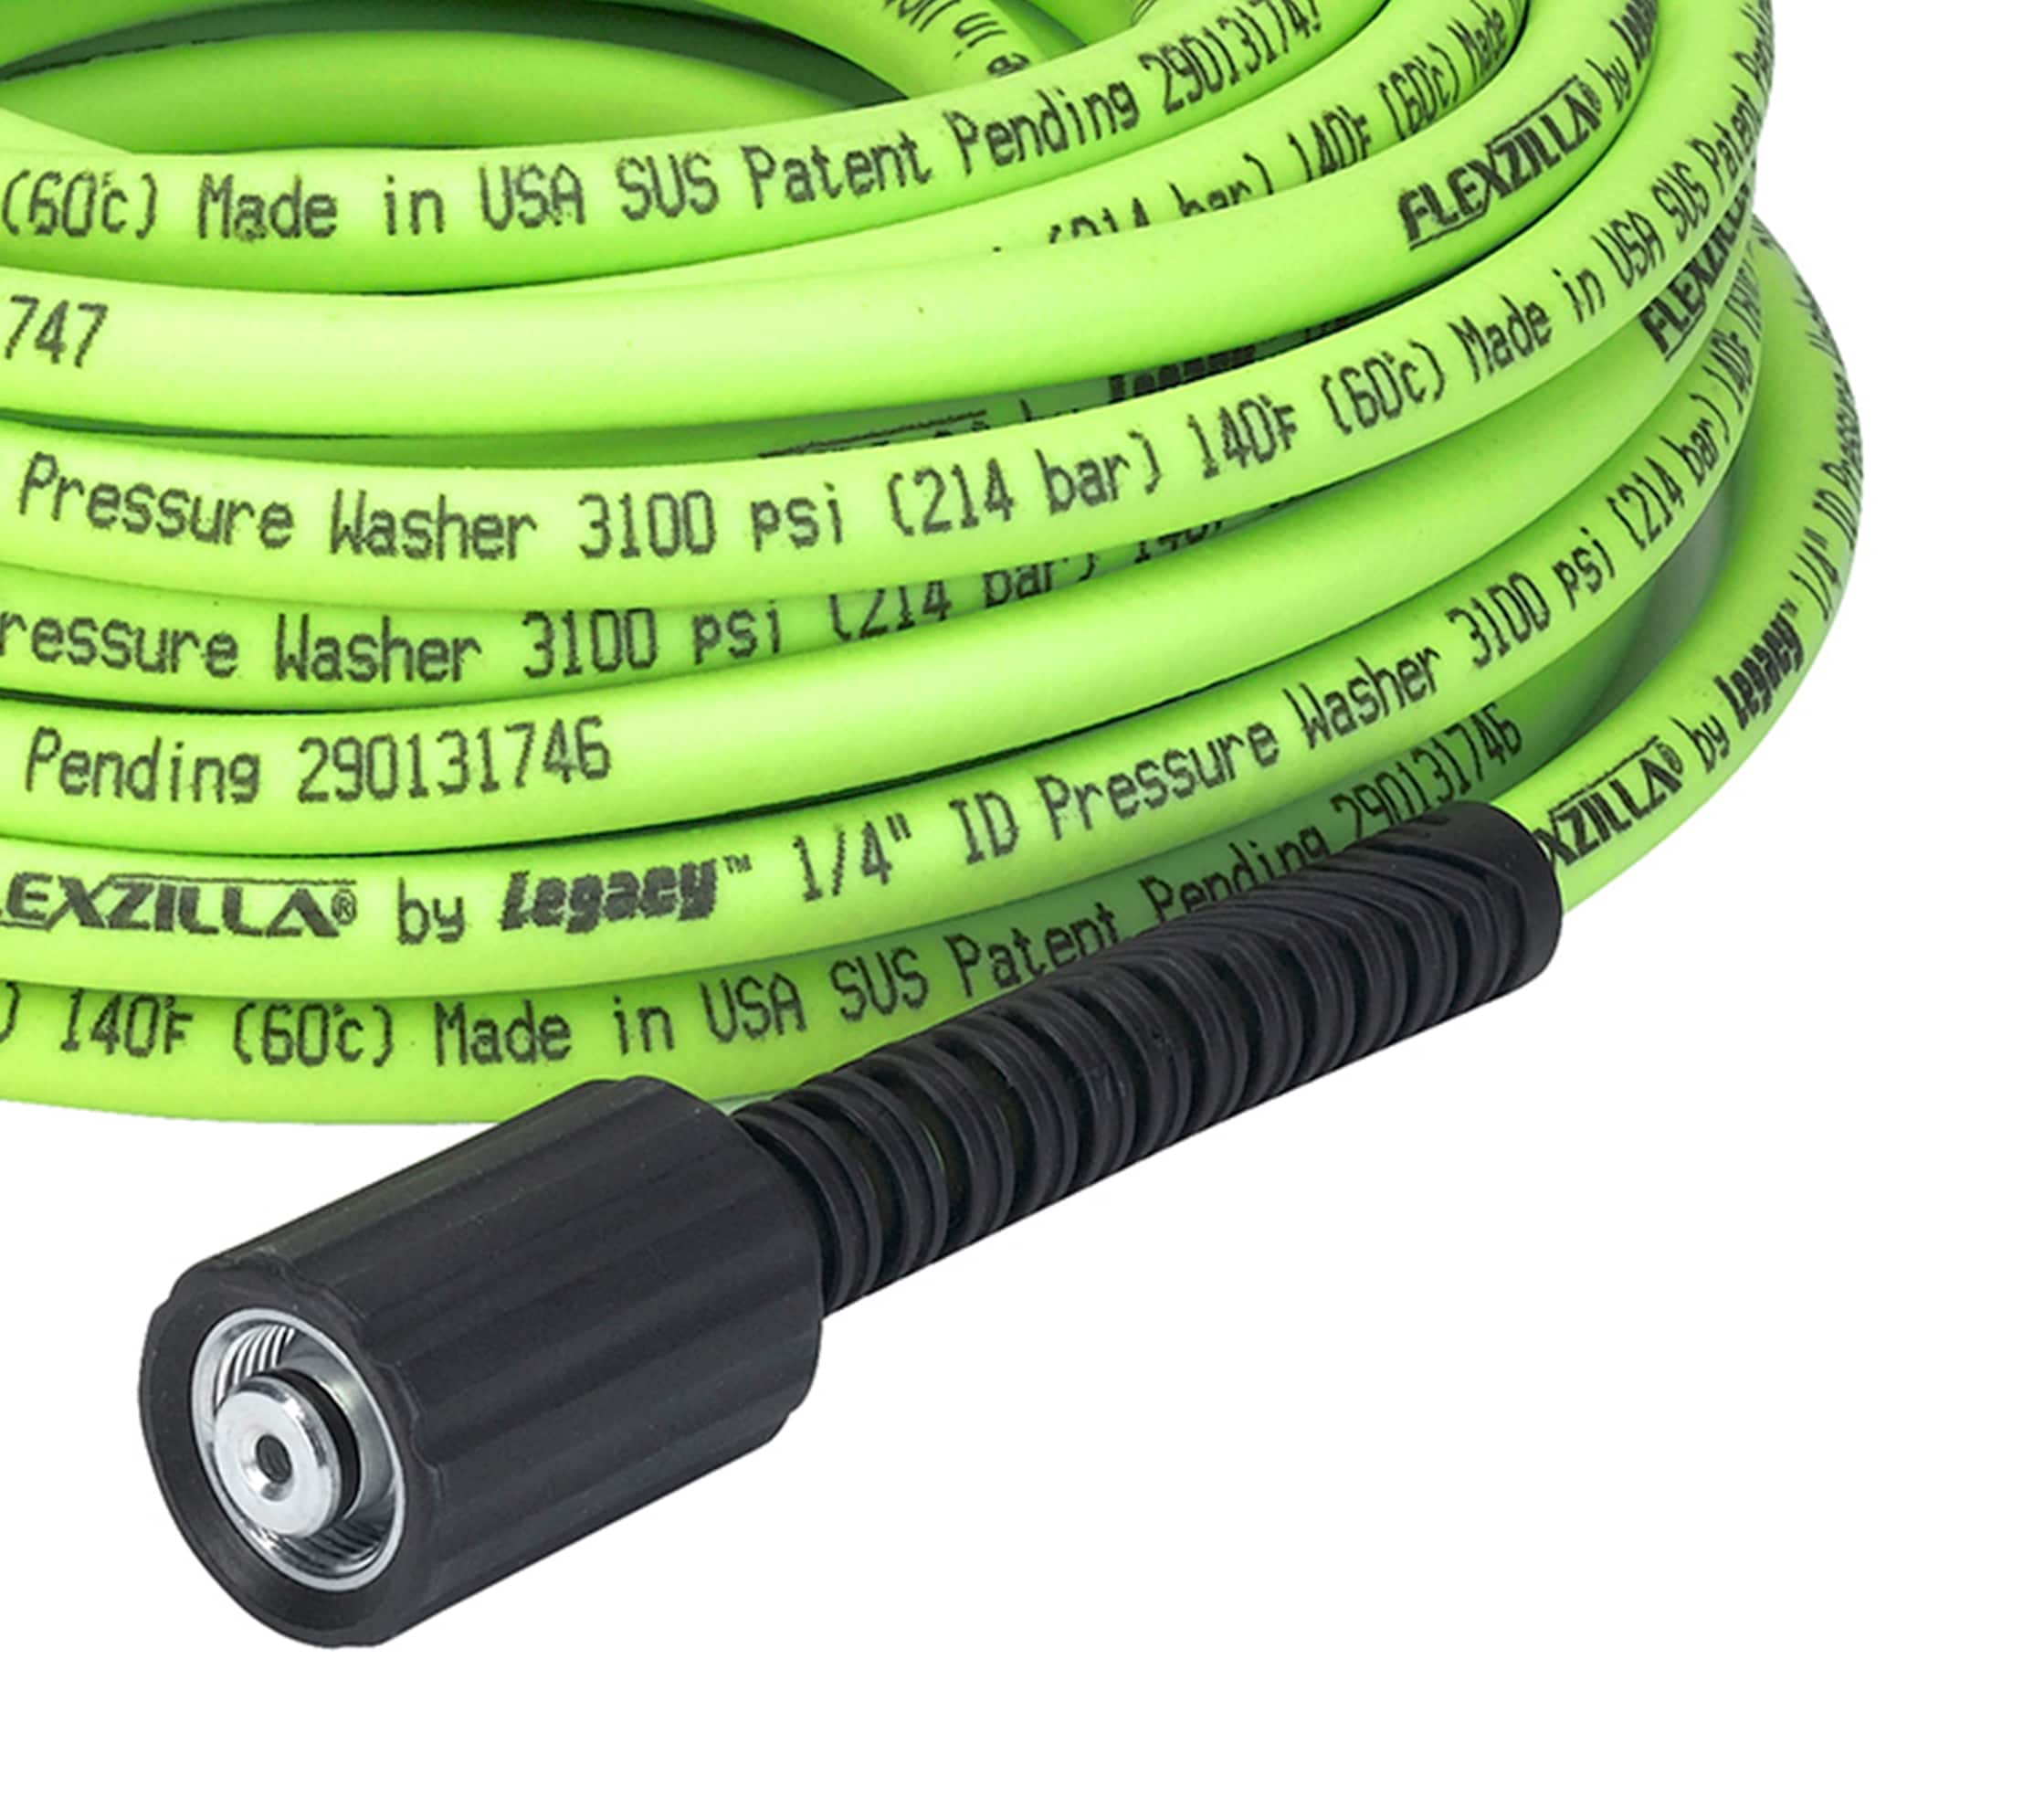 corretic Pressure Washer Whip Hose 8 ft x 3/8 inch, Hose Reel Connector Hose for Pressure Washing, 4000 PSI Power Washer Jump